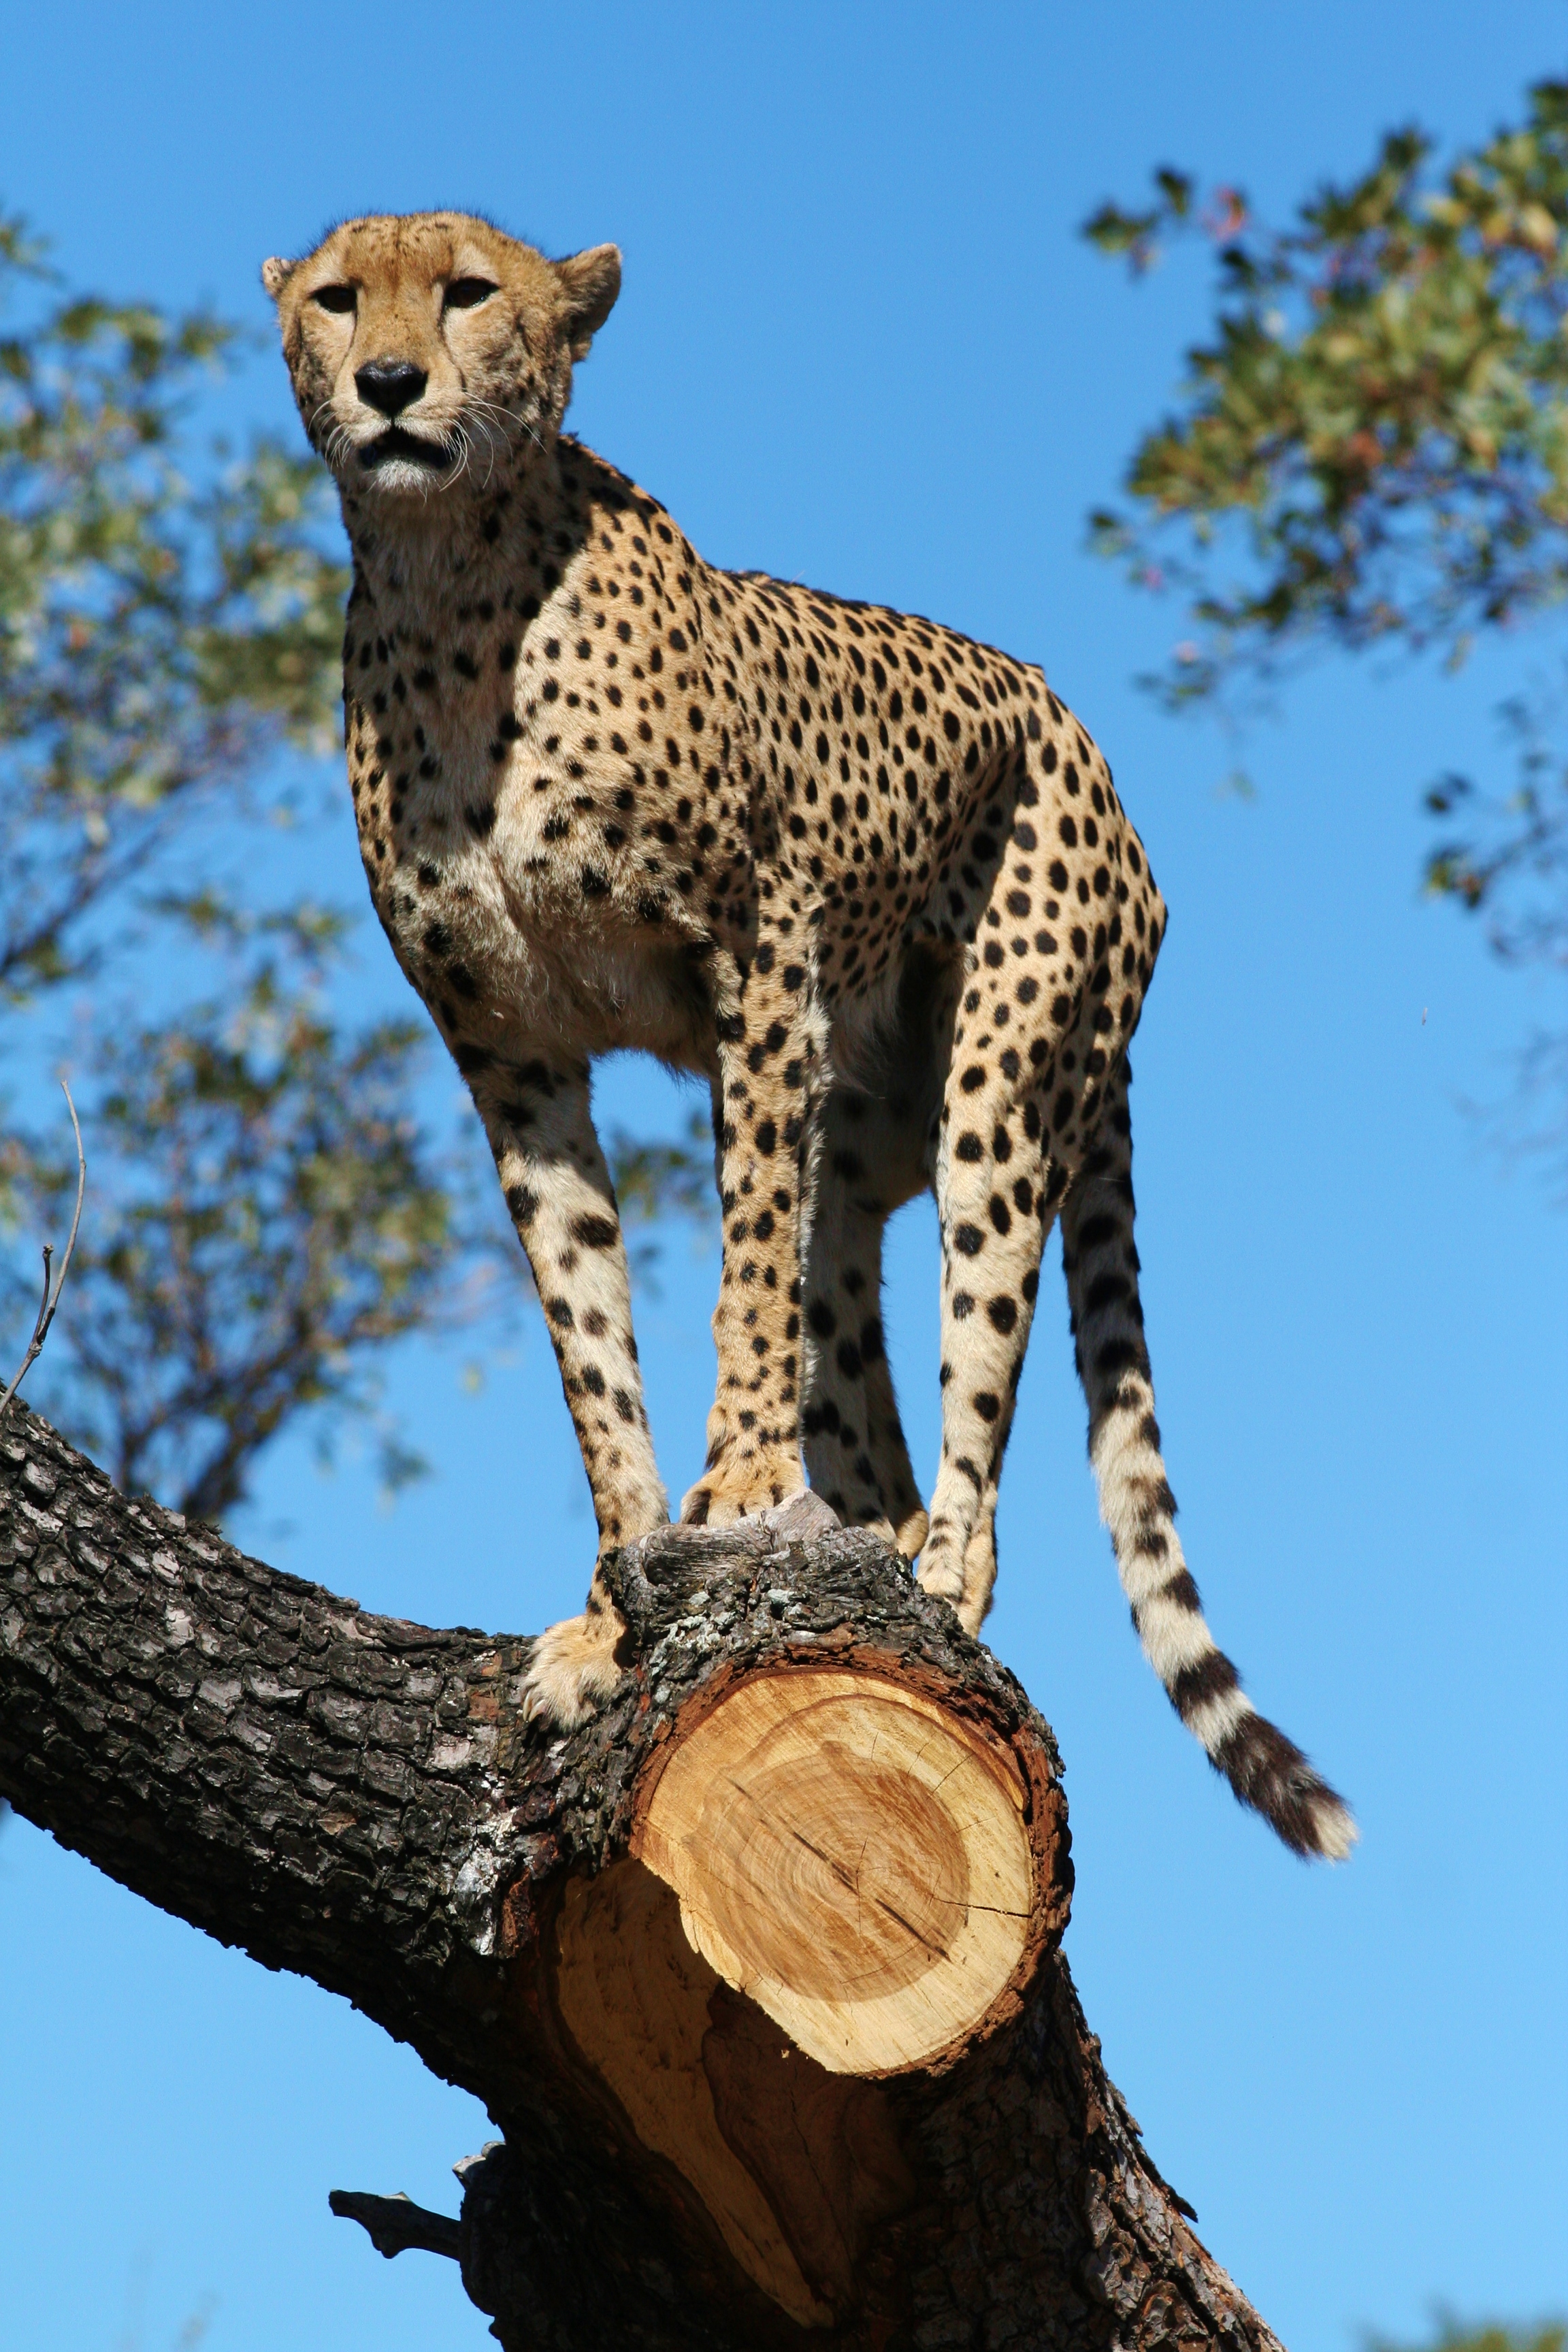 It is a privilege to spot one of these cheetah, as there are only estimated to be about 400 in the Kruger National Park